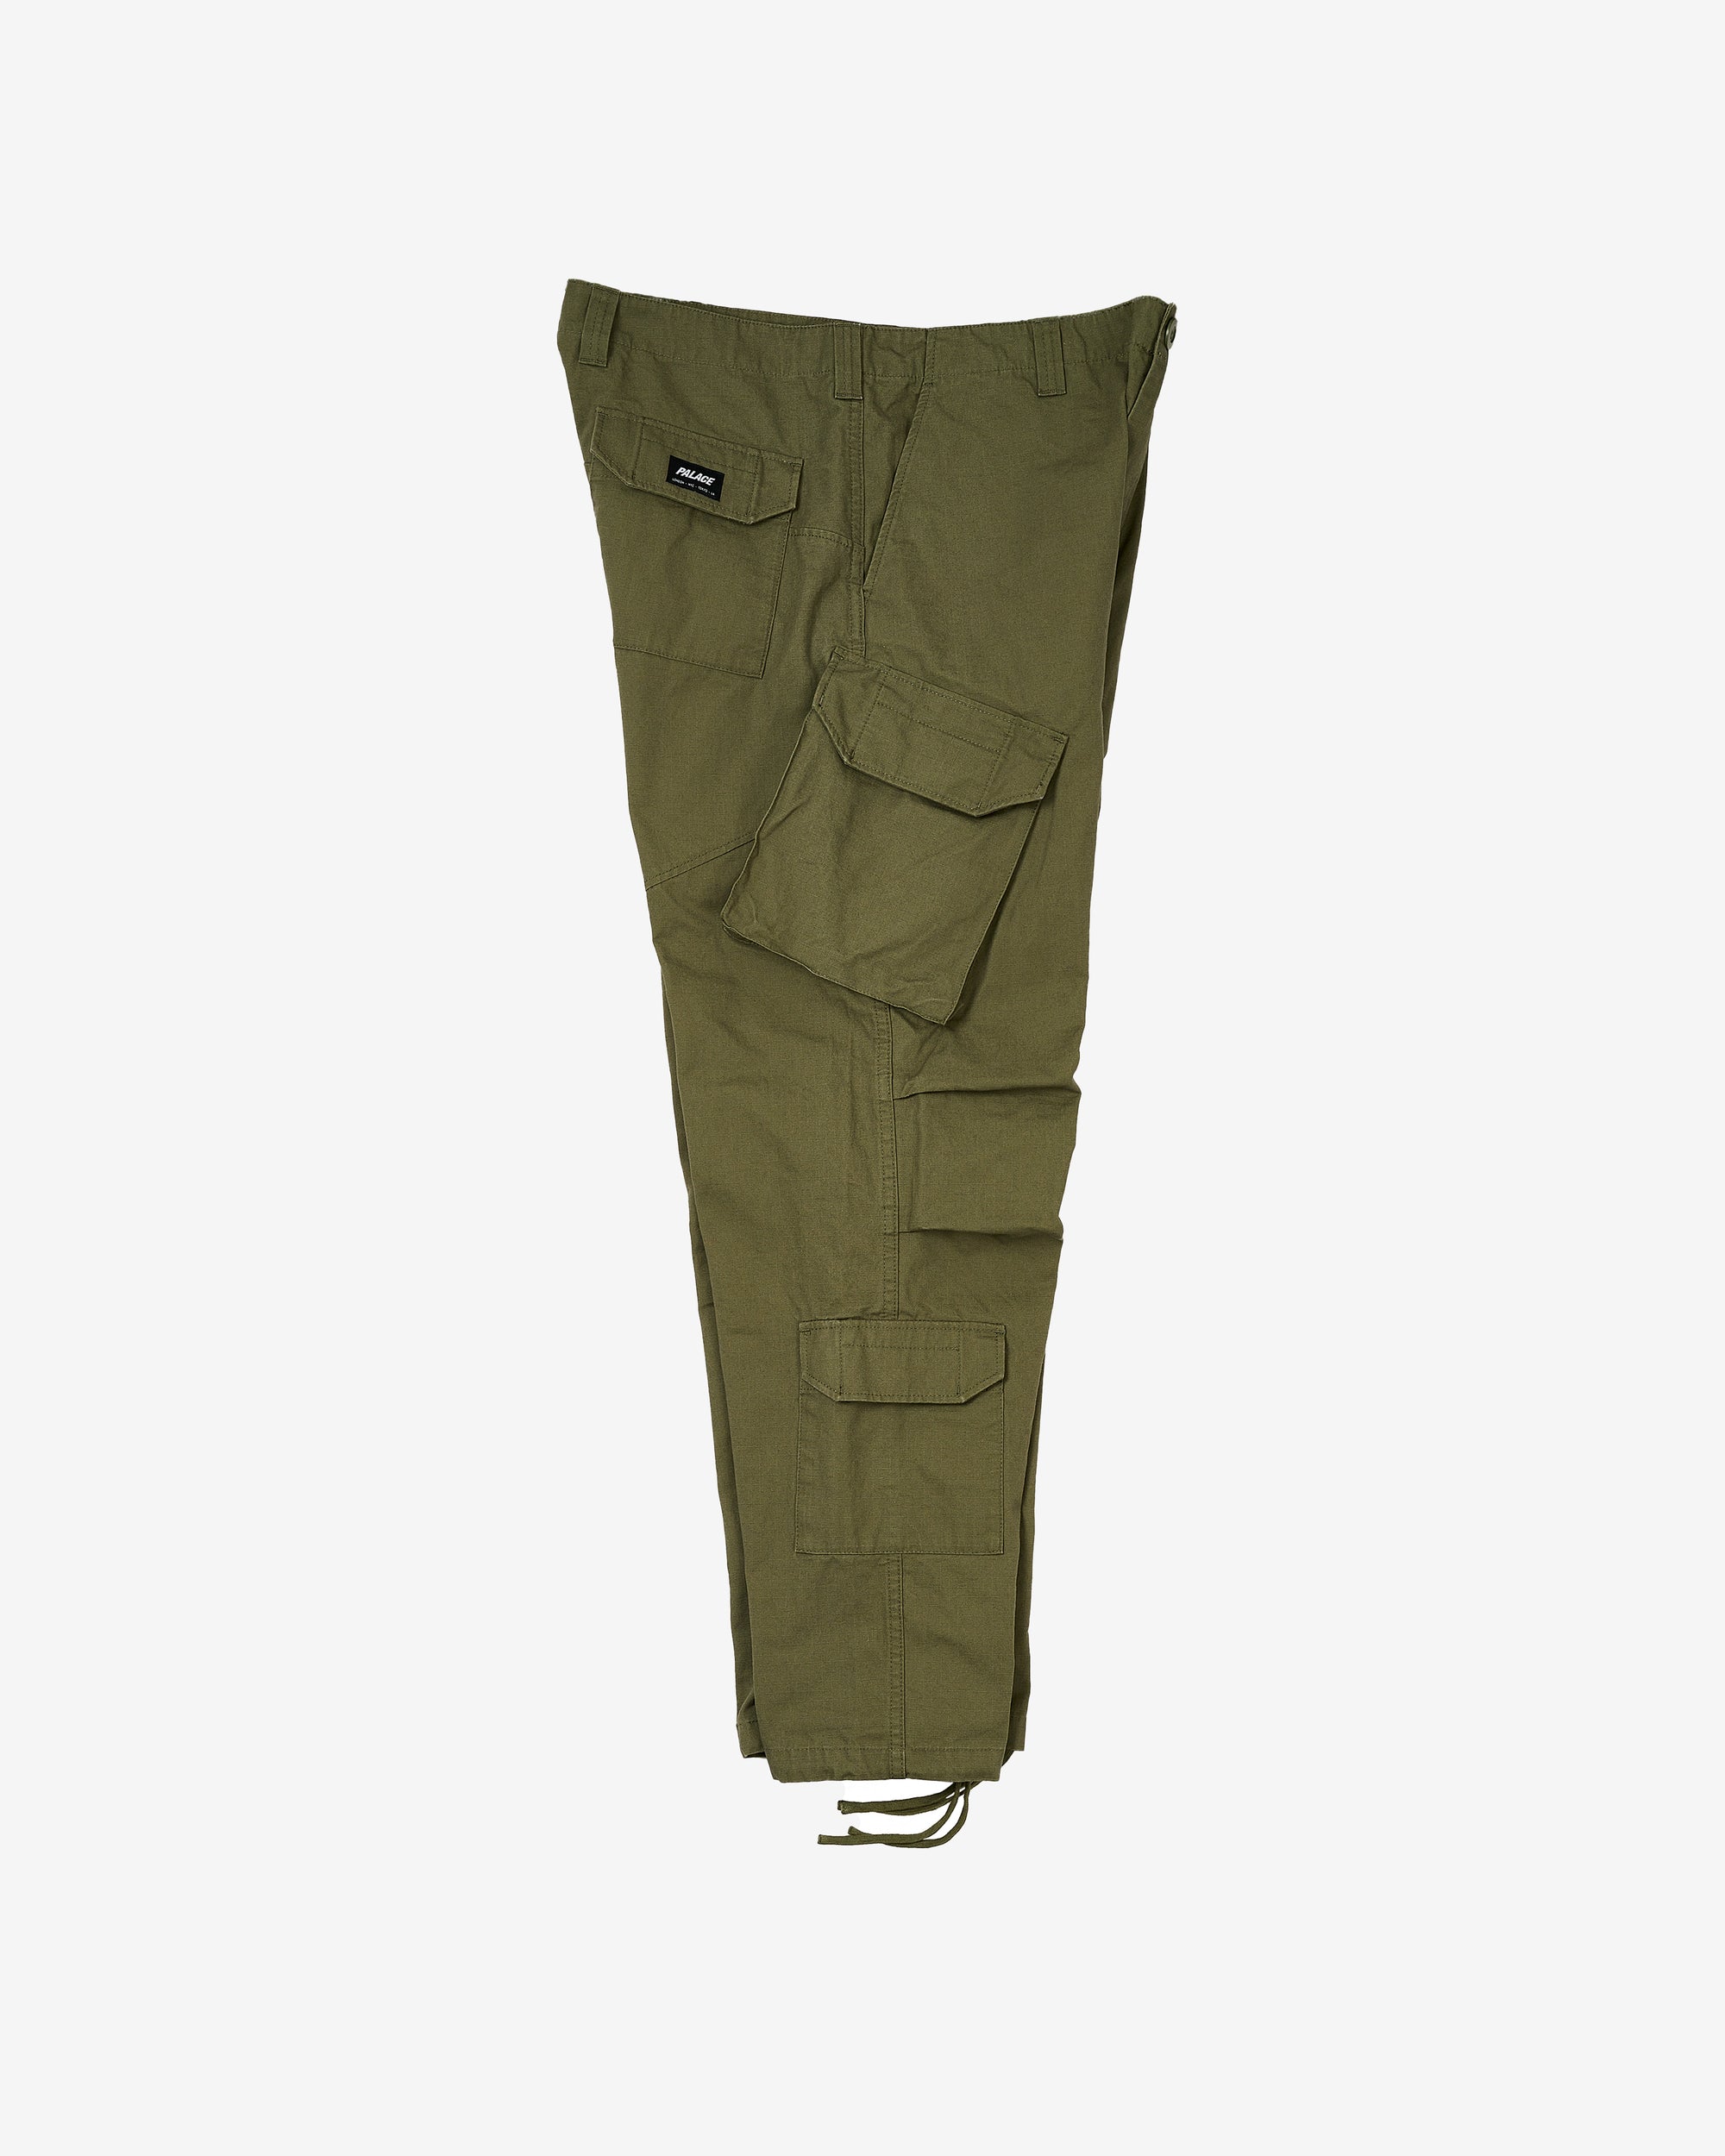 Palace - Men's Rn Cargo Trouser - (Olive) view 3